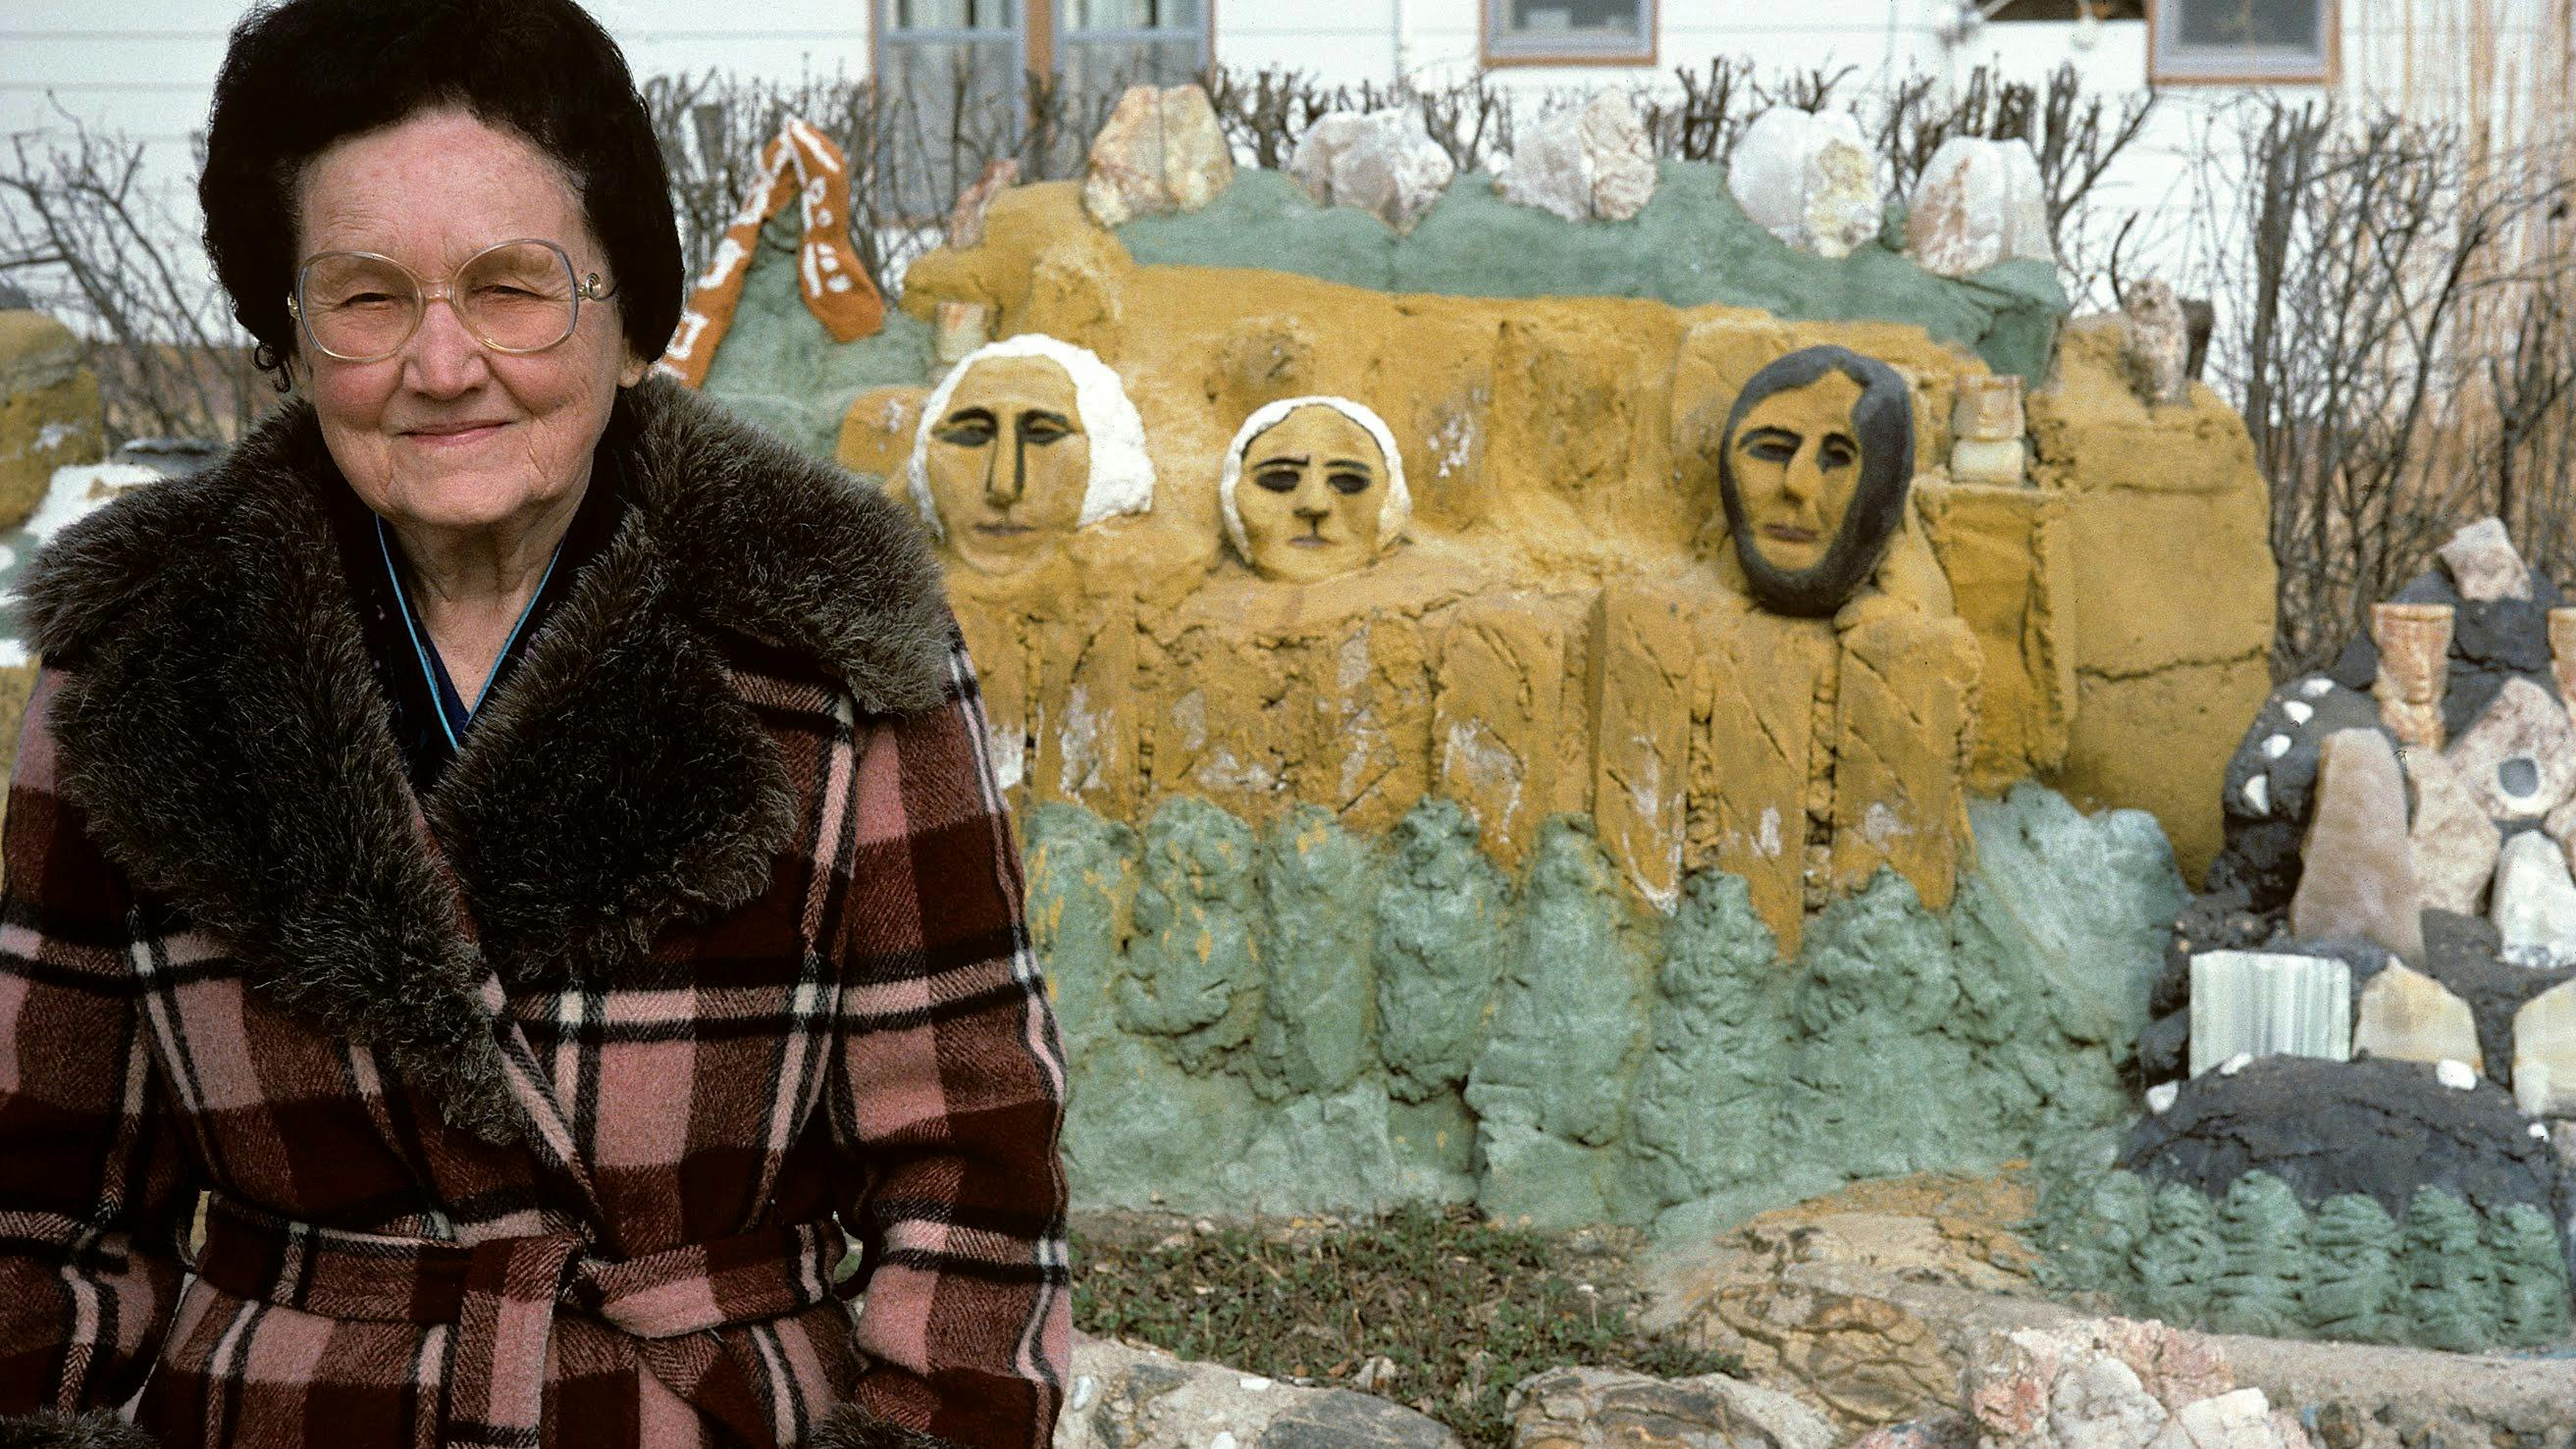 The artist standing in front of her multicolored concrete sculpture of Mt. Rushmore. She is smiling at the camera and is wearing her circular glasses and a brown plaid coat with brown fur trim.